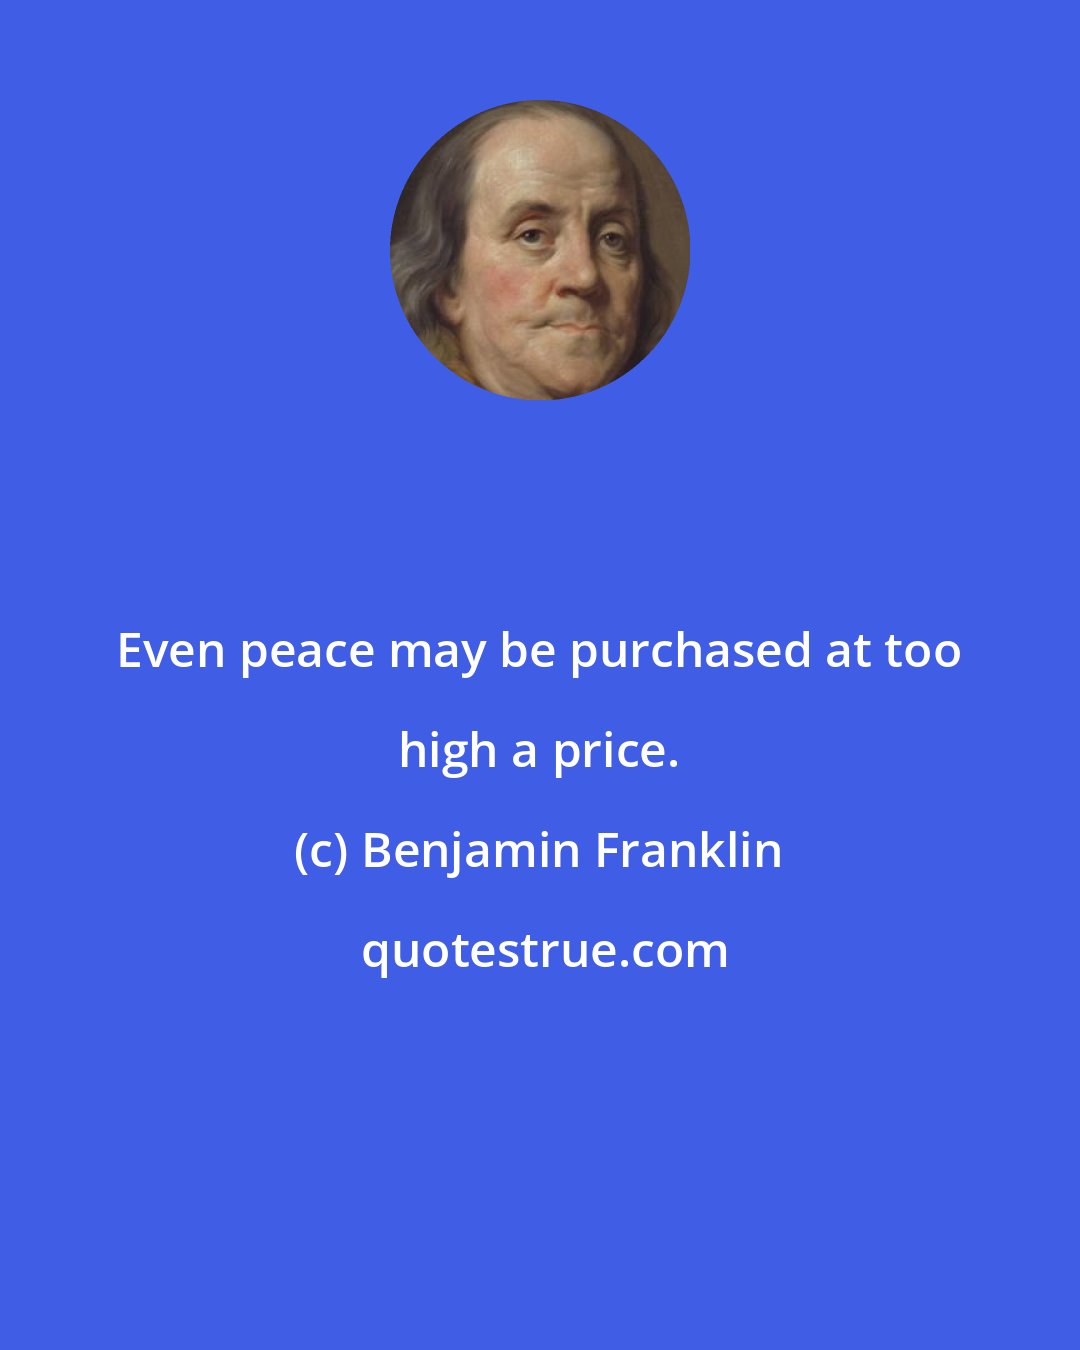 Benjamin Franklin: Even peace may be purchased at too high a price.